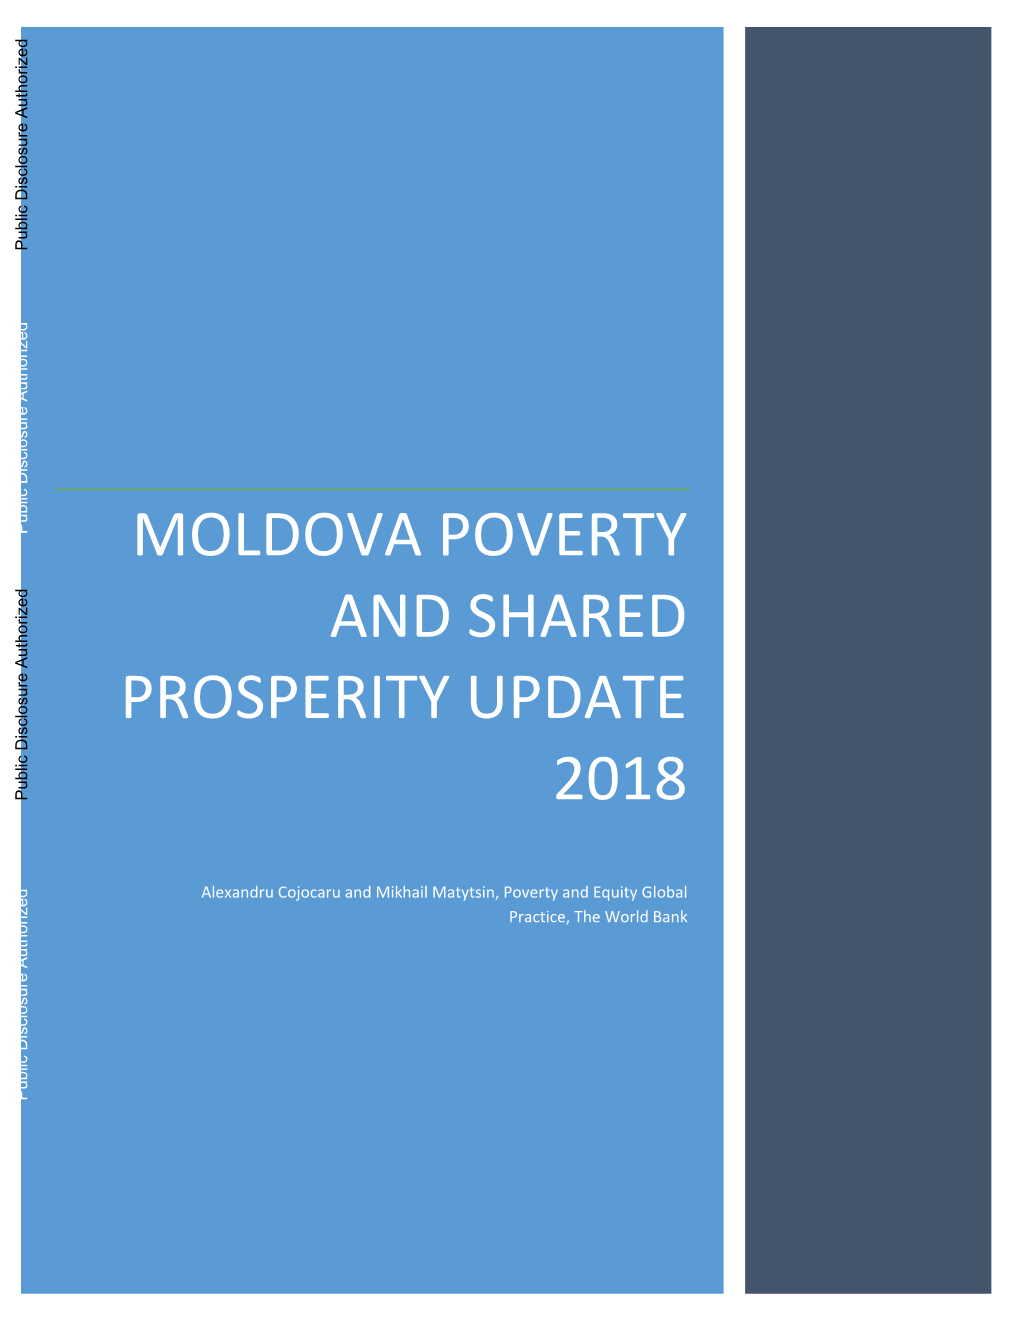 Poverty and Shared Prosperity Update, Release in 2017, Updated Poverty and Shared Prosperity Trends up to 2015